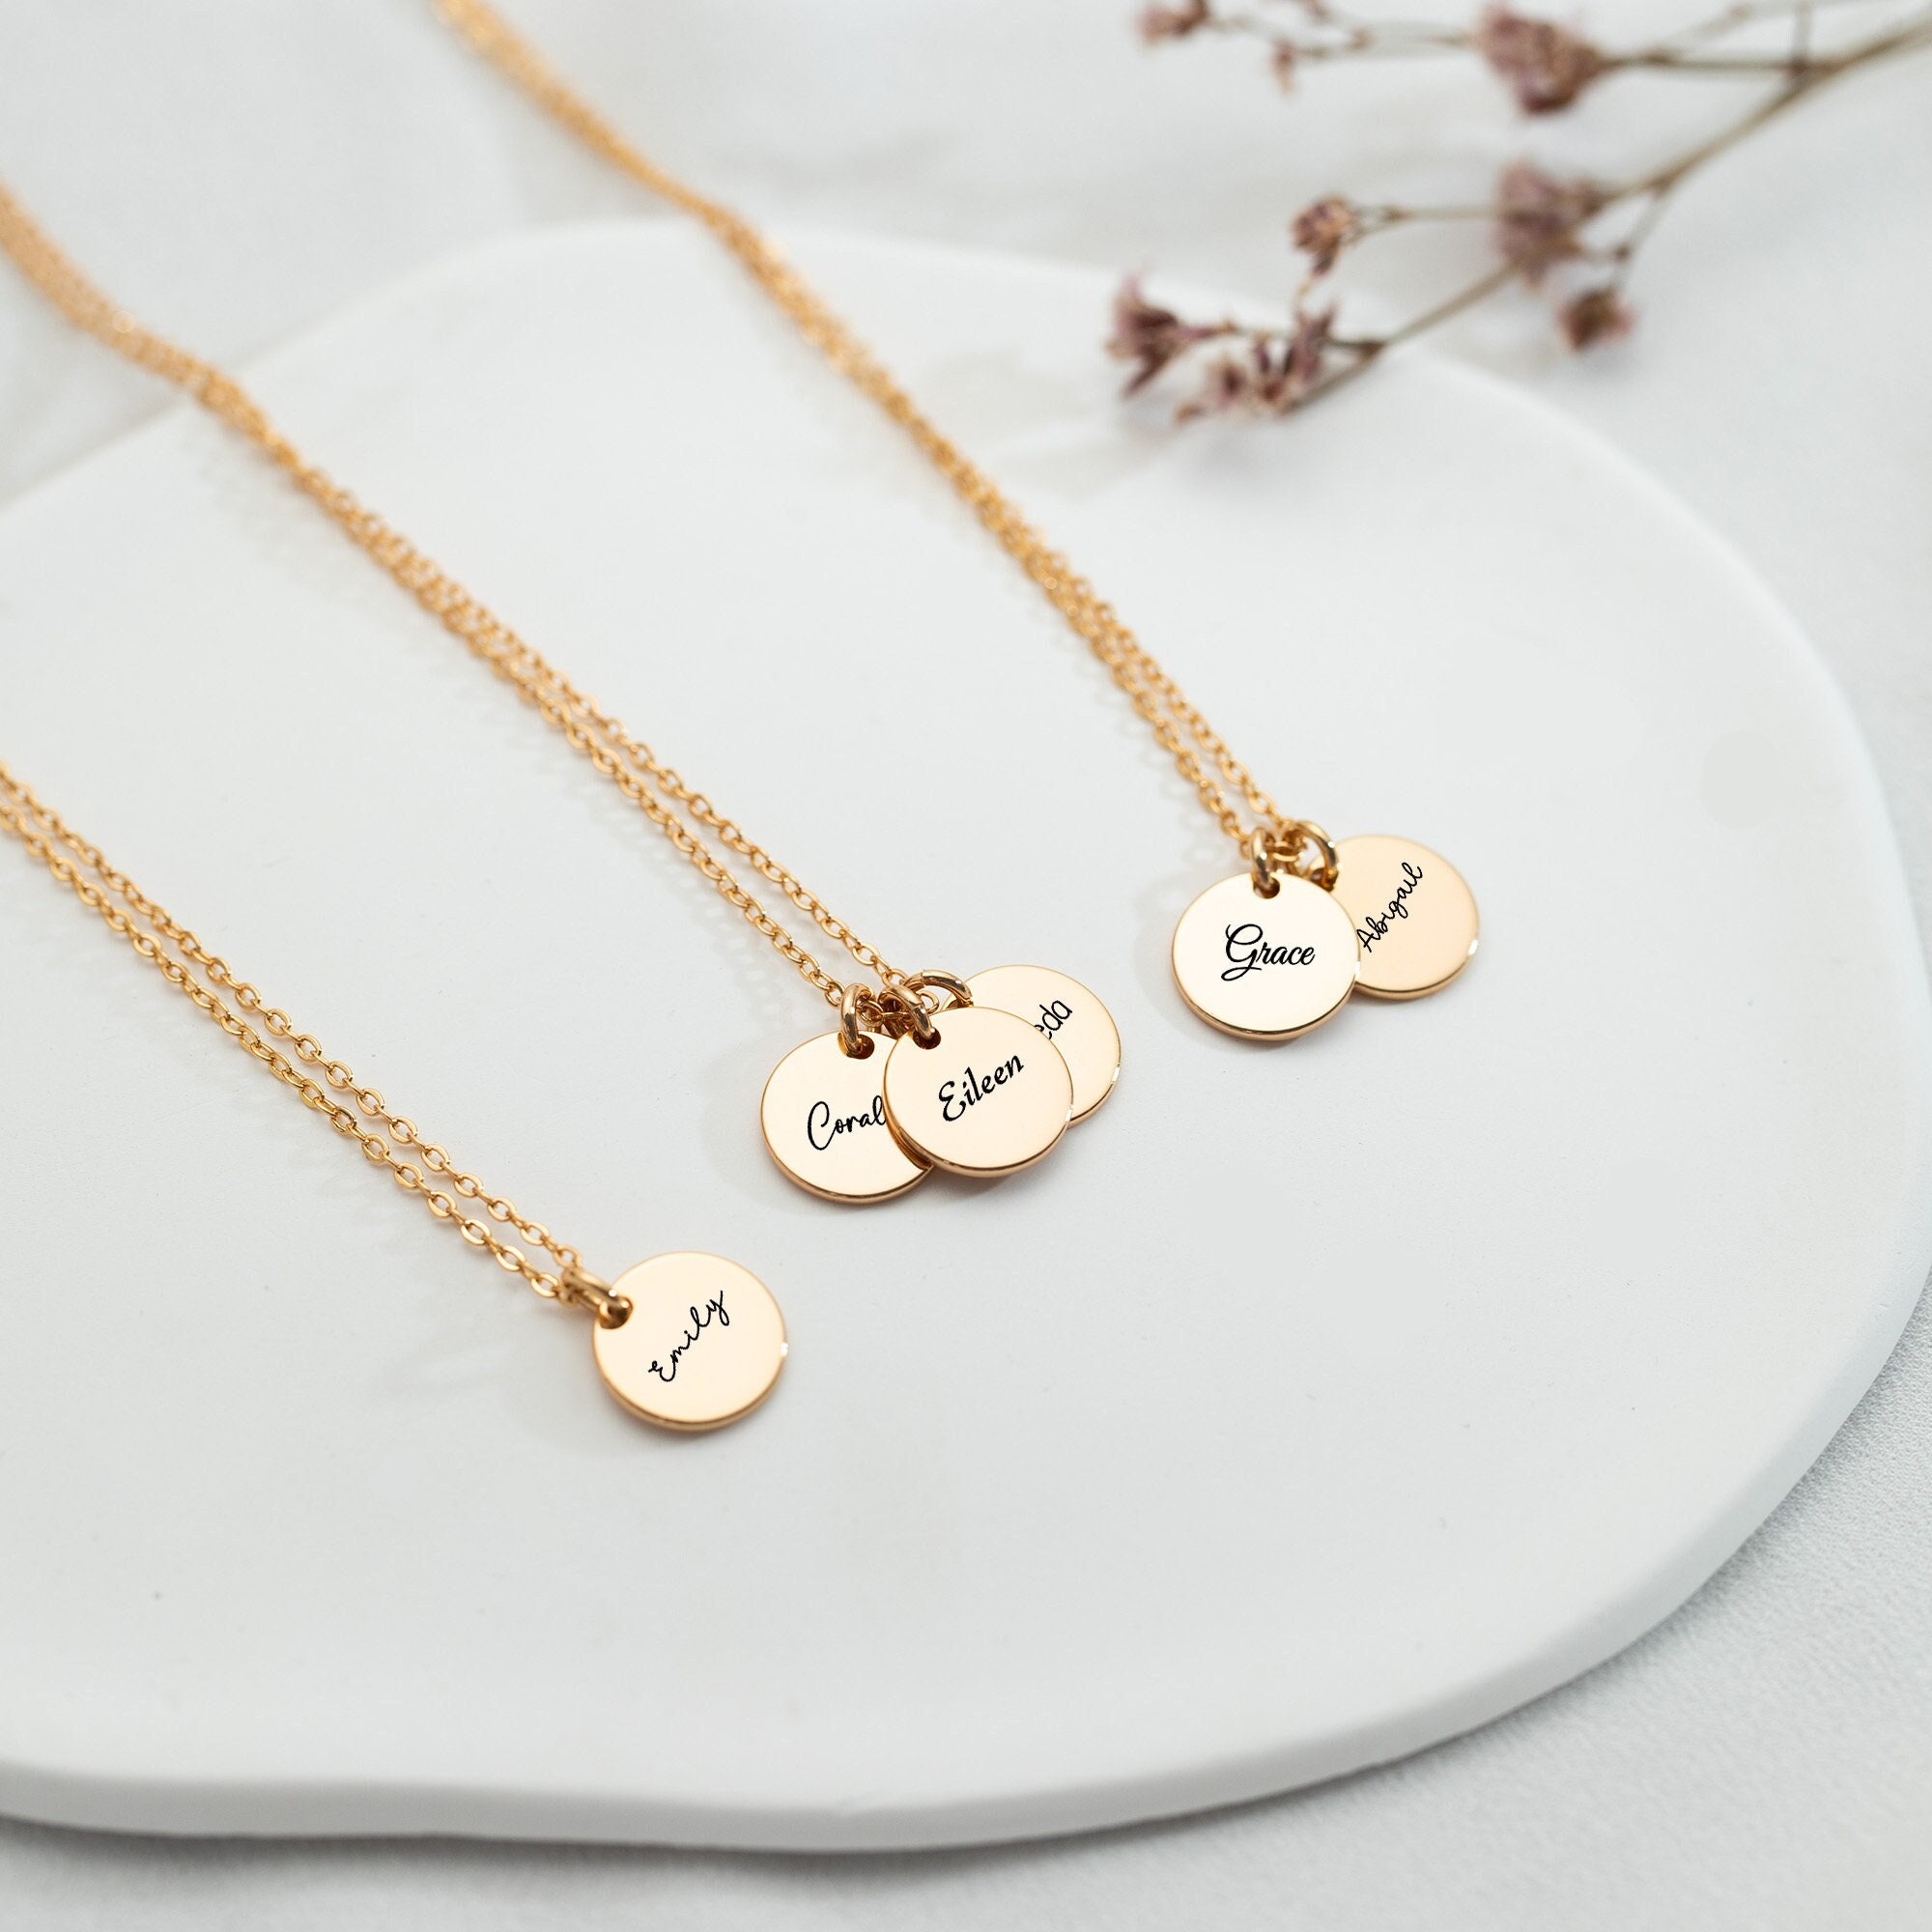 Hand engraved round disc monogram initials necklace in Sterling silver or  solid karate gold: 10K, 14K or 18K